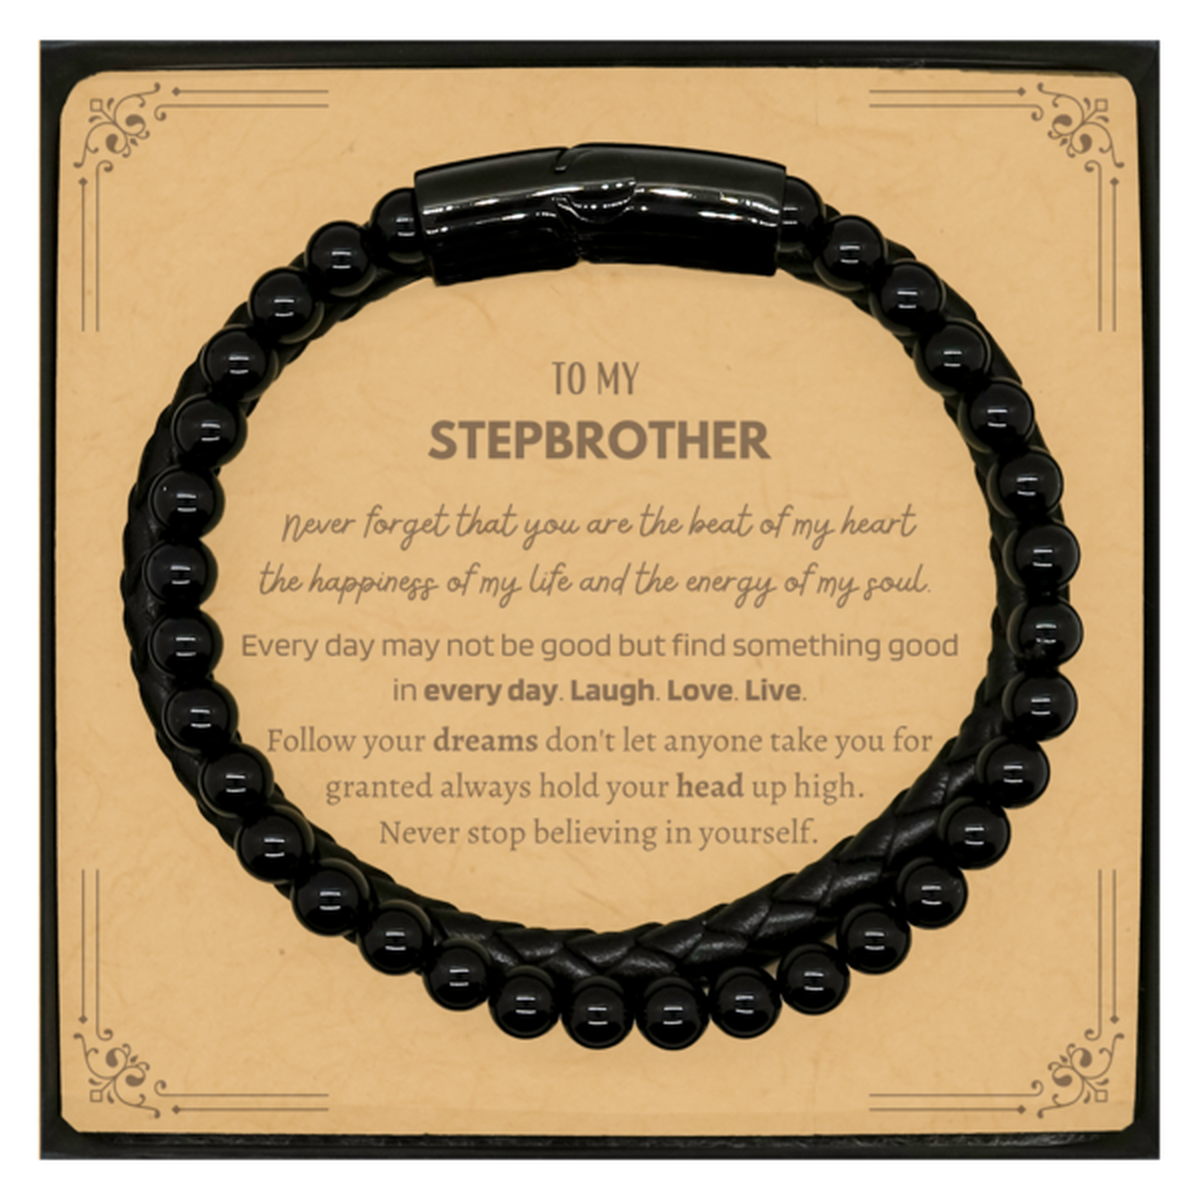 To My Stepbrother Message Card Gifts, Christmas Stepbrother Stone Leather Bracelets Present, Birthday Unique Motivational For Stepbrother, To My Stepbrother Never forget that you are the beat of my heart the happiness of my life and the energy of my soul